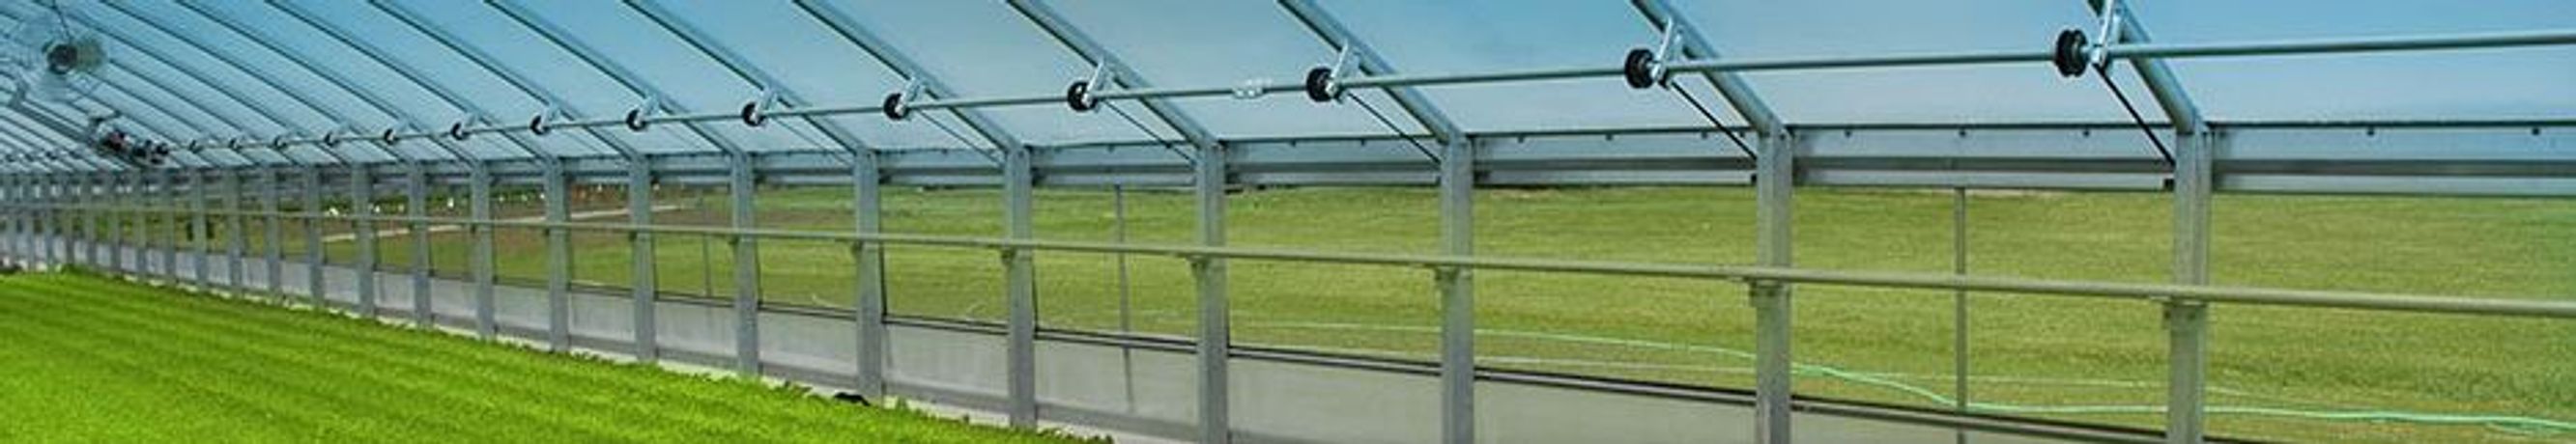 Wadsworth - Greenhouse Control System